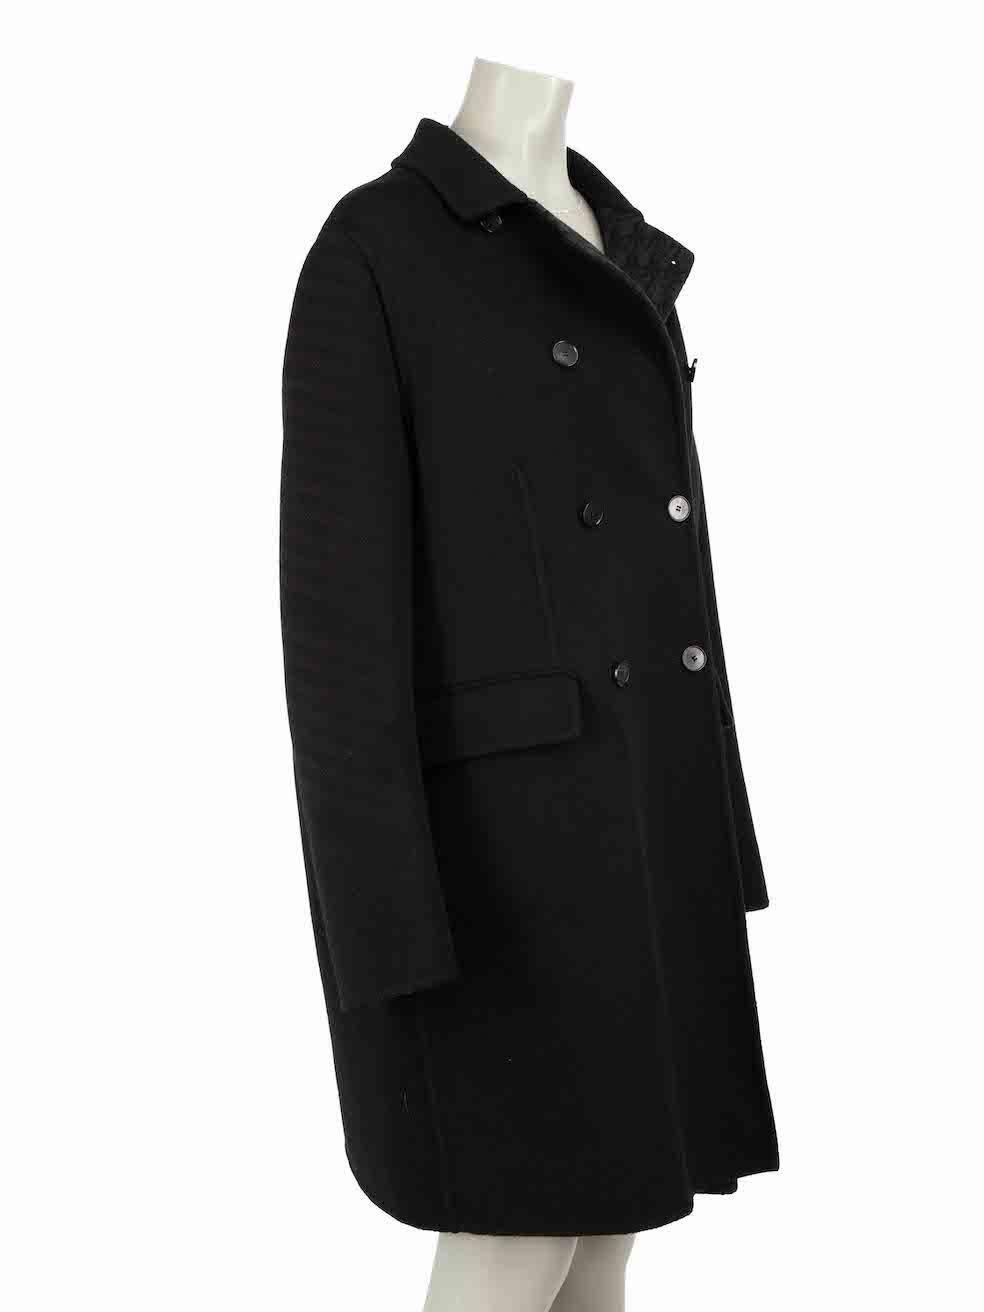 CONDITION is Never worn, with tags. No visible wear to coat is evident on this new Dior designer resale item.
 
Details
Black
Wool
Mid length coat
Double breasted
2x Front side pockets with flap
Oblique pattern lining
 
Made in Italy
Composition
99%